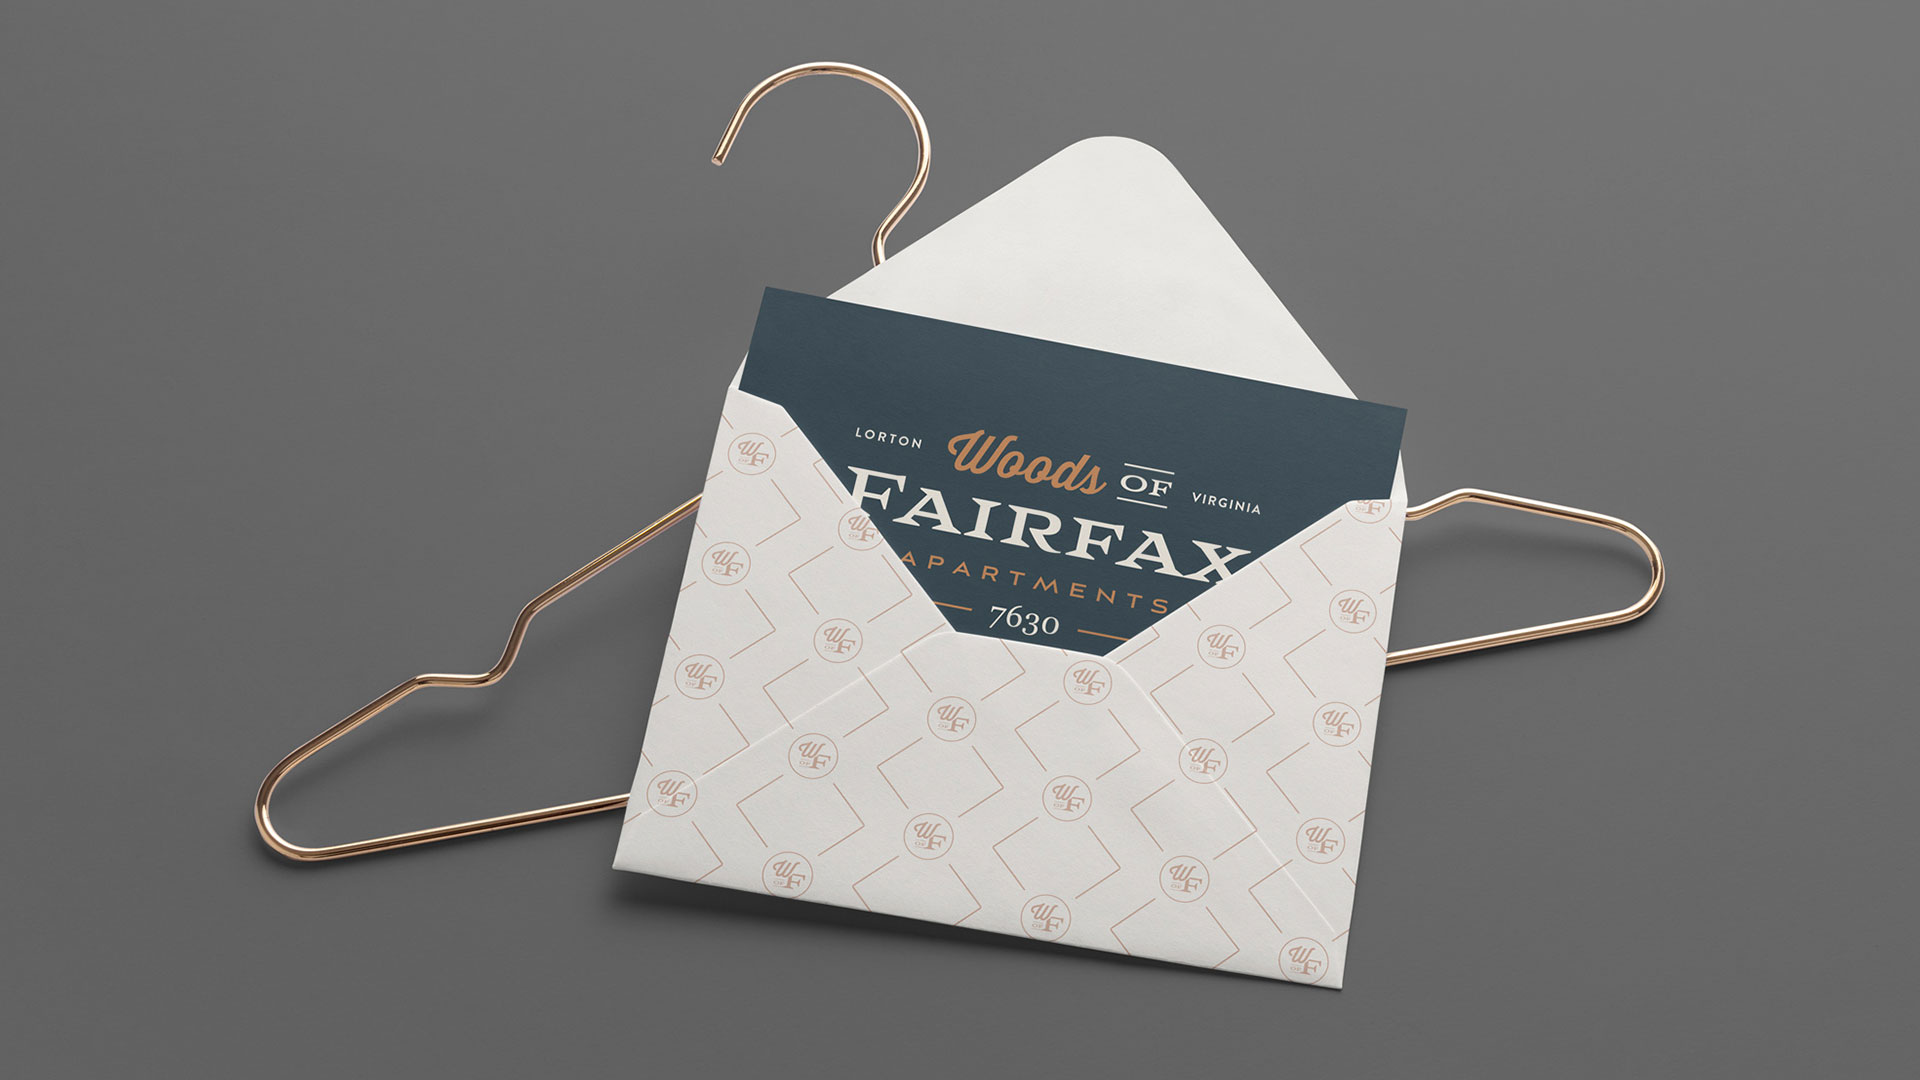 woods of fairfax appartments envelope